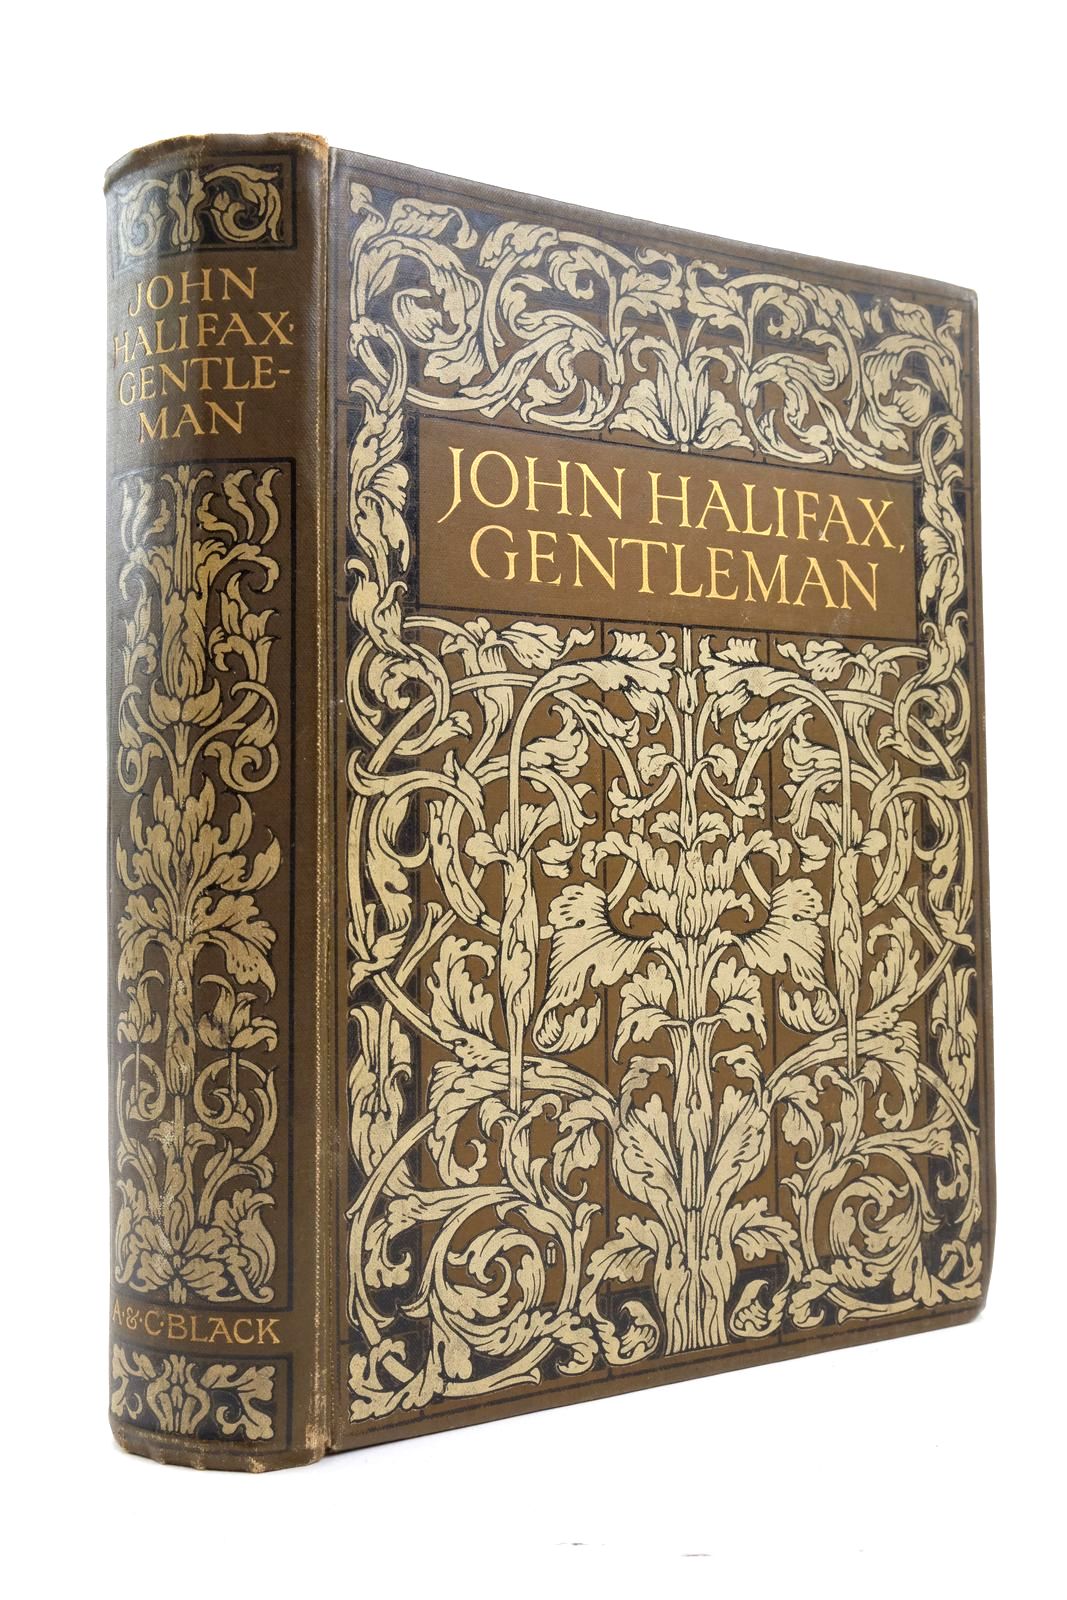 Photo of JOHN HALIFAX GENTLEMAN written by Murlock, Dinah Maria Home, Gordon illustrated by Moser, Oswald Nicholls, G.F. published by Adam &amp; Charles Black (STOCK CODE: 2136946)  for sale by Stella & Rose's Books